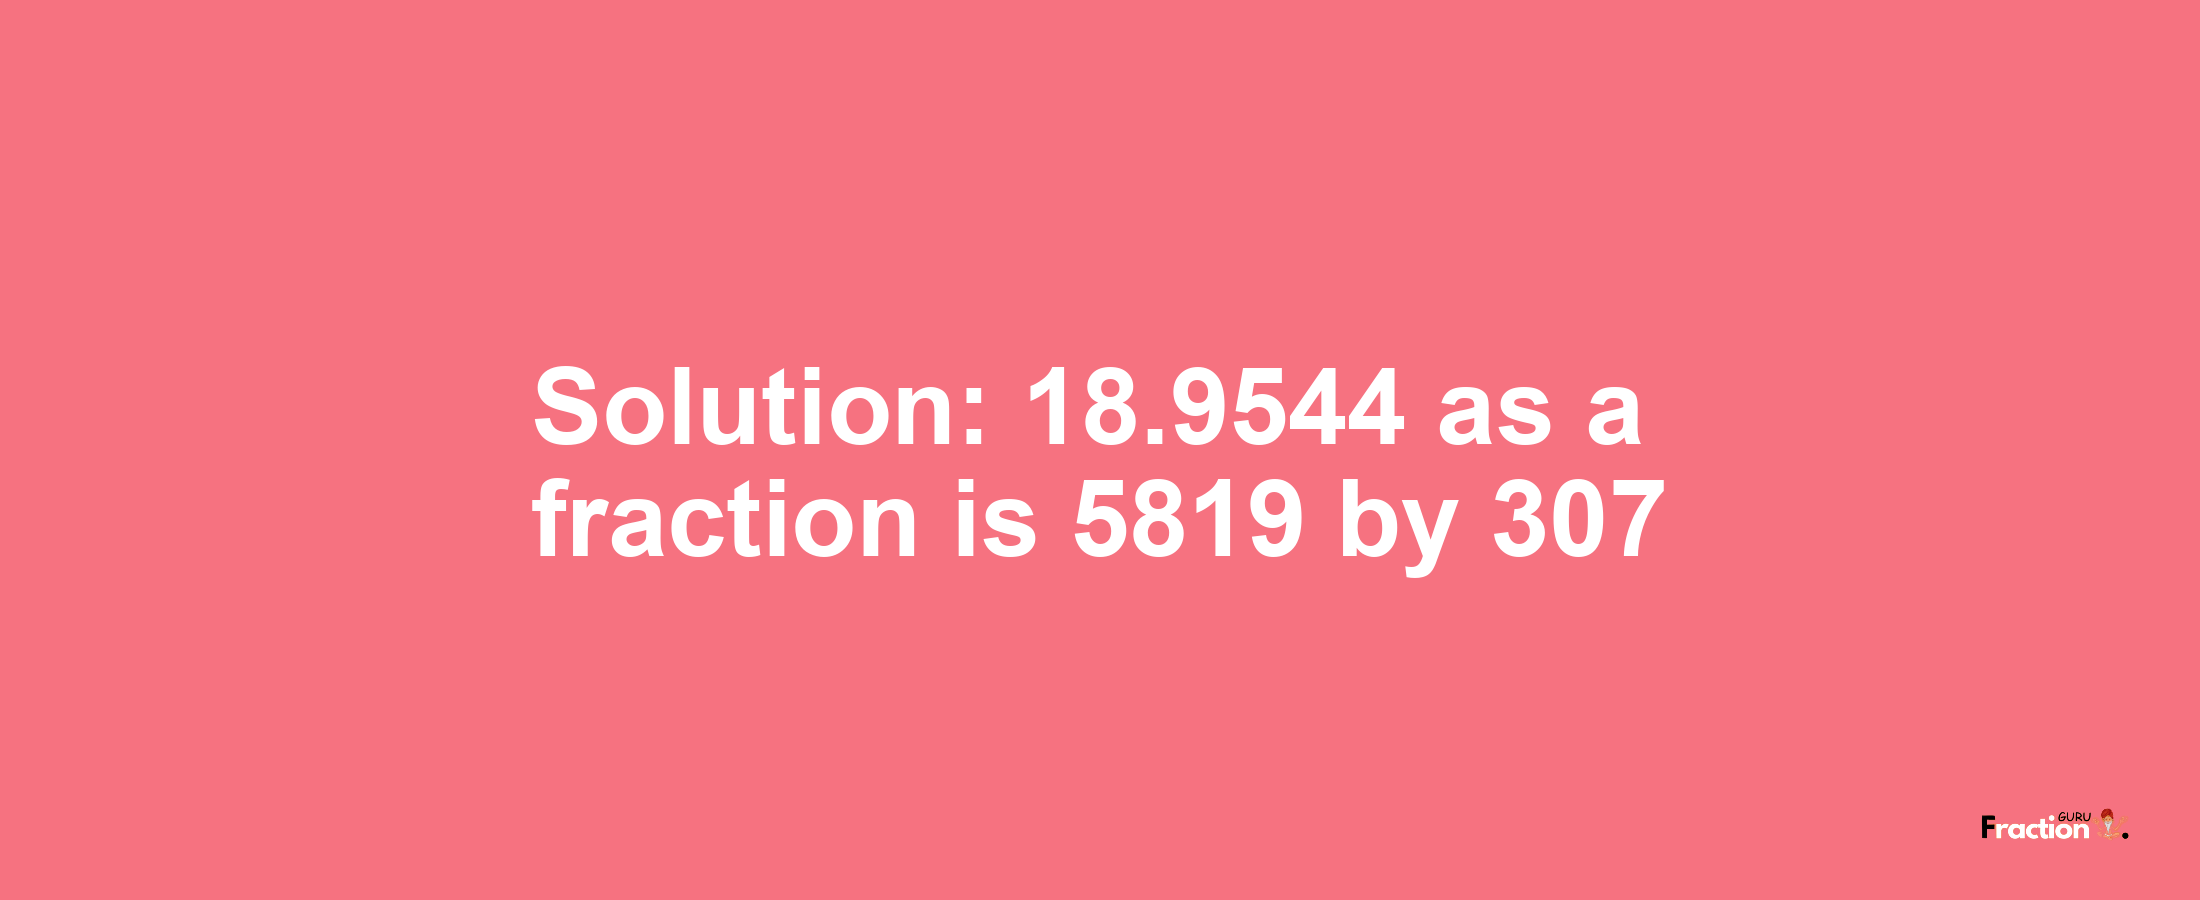 Solution:18.9544 as a fraction is 5819/307